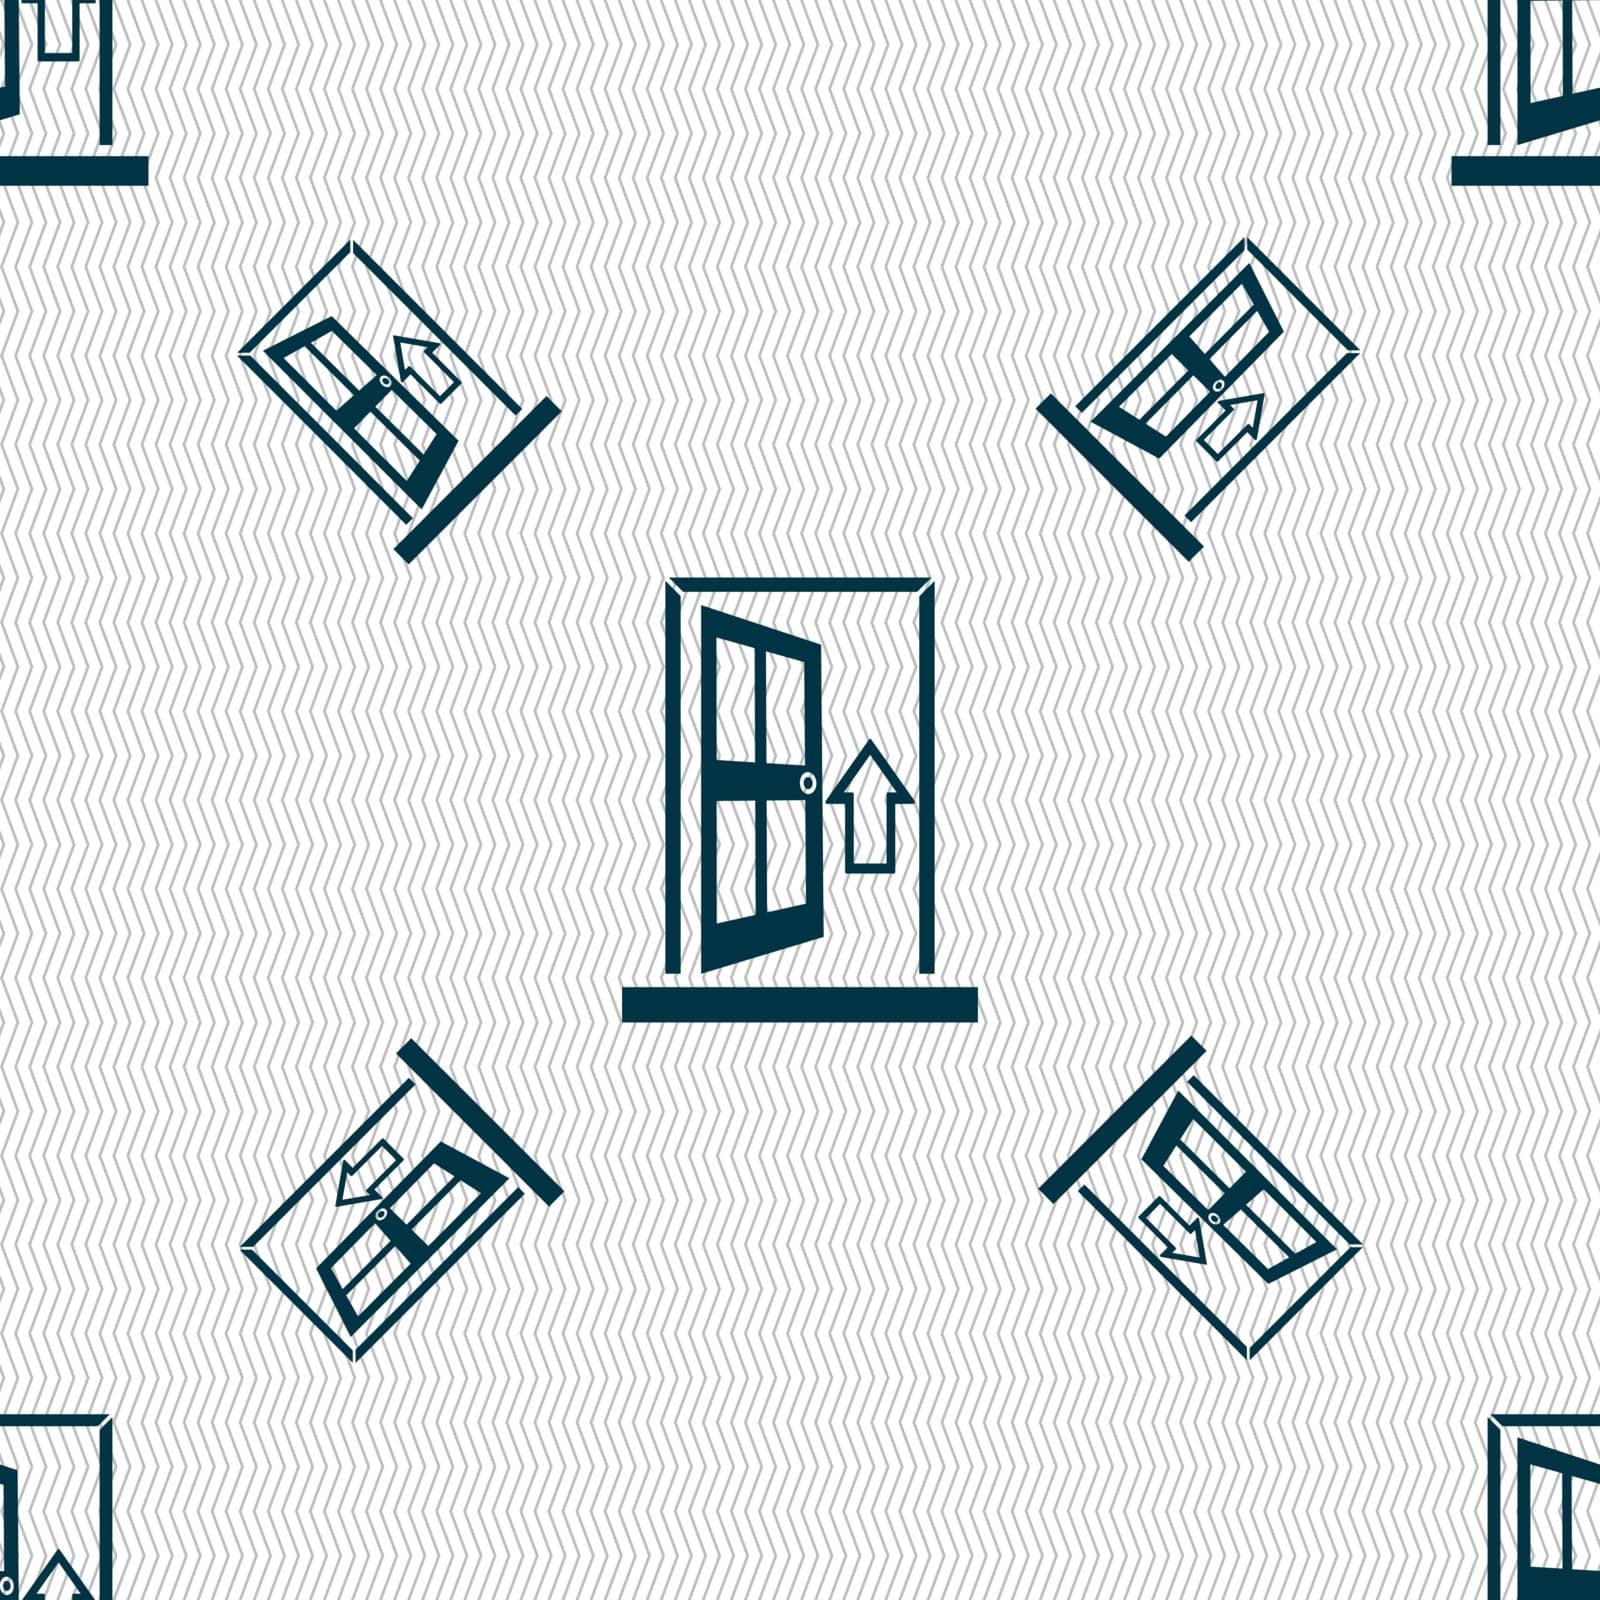 Door, Enter or exit icon sign. Seamless pattern with geometric texture. Vector illustration